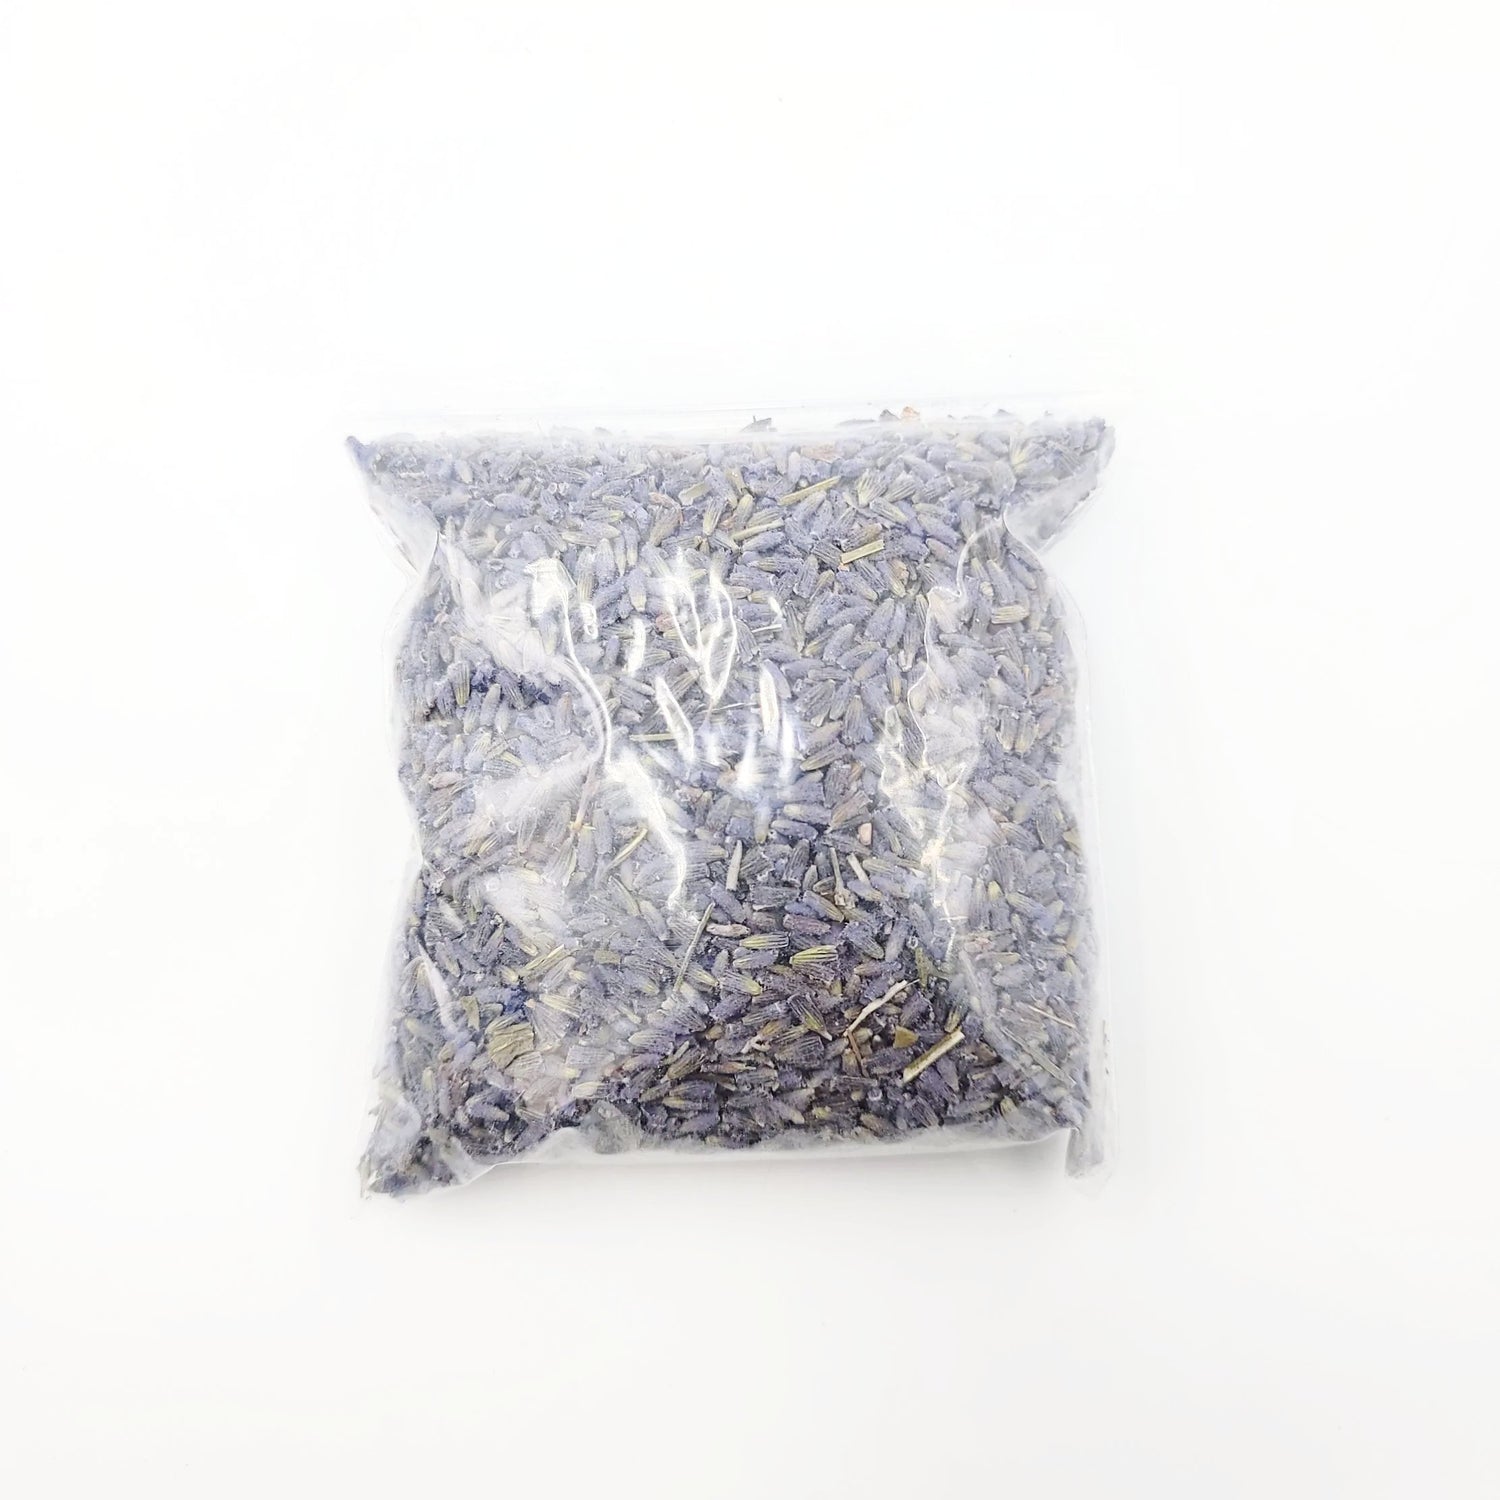 Lavender Flower Dried - Elevated Metaphysical